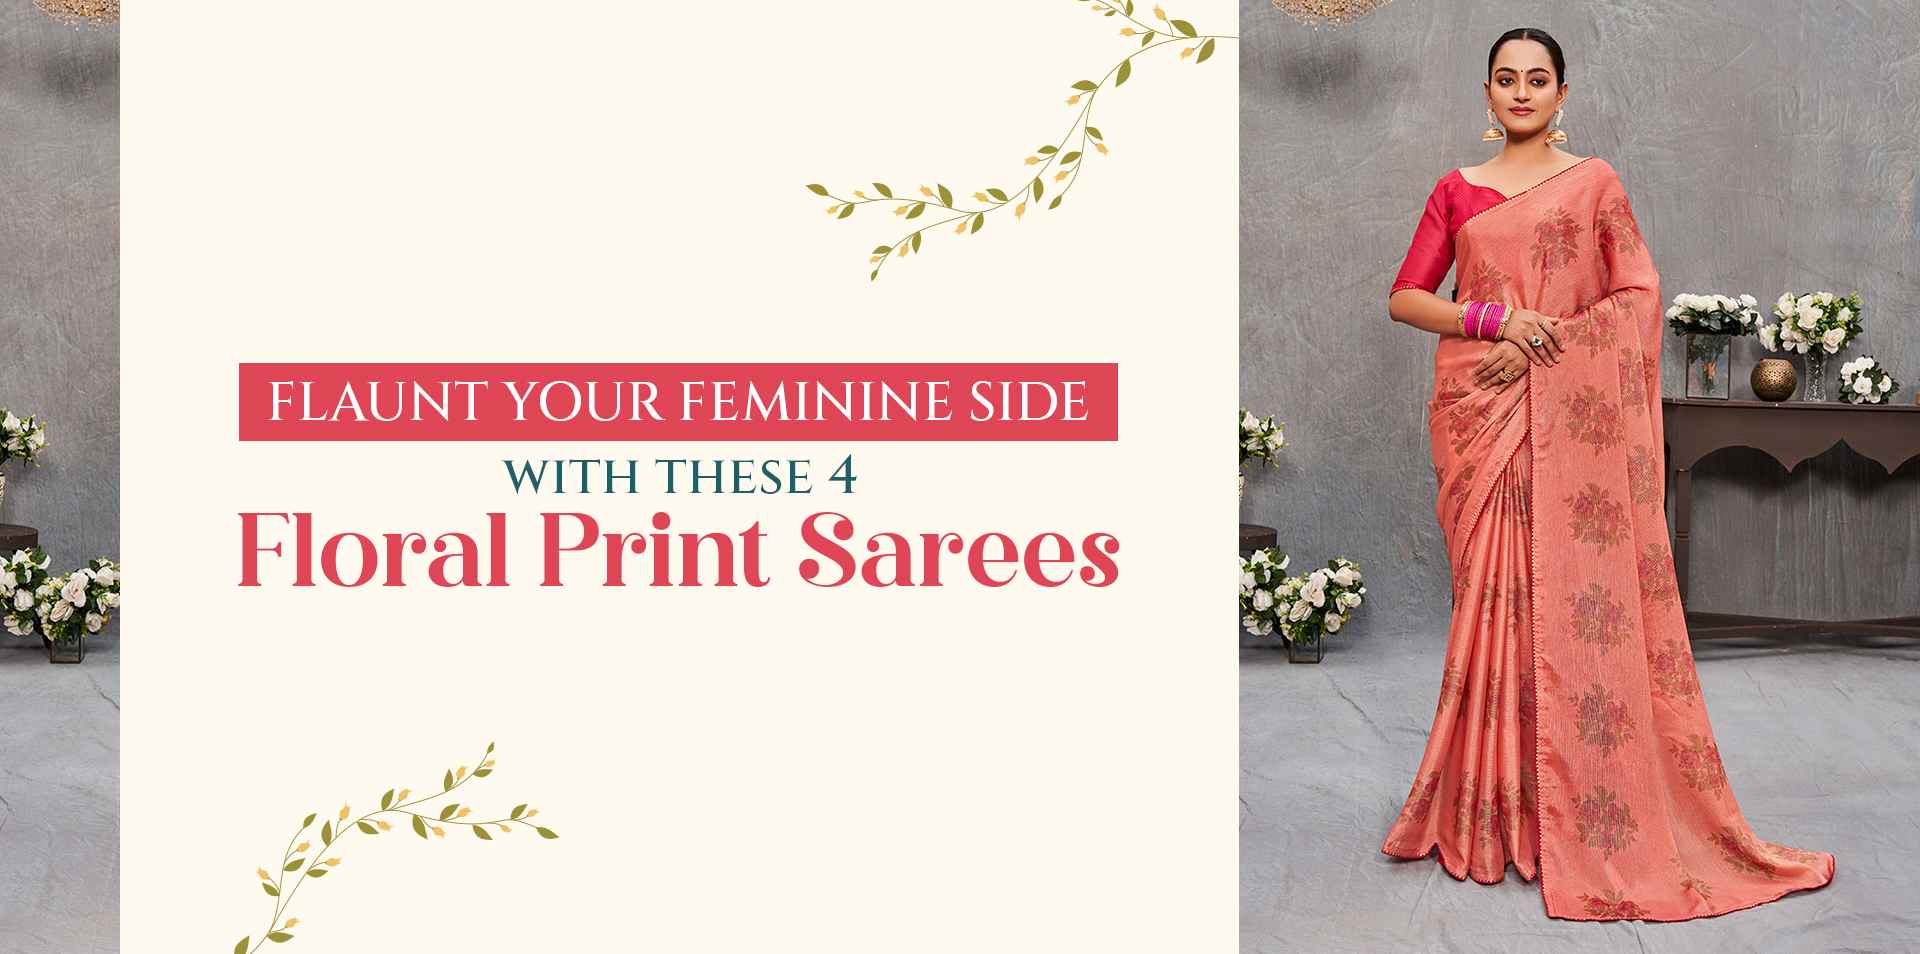 Flaunt Your Feminine Side with these 4 Floral Print Sarees